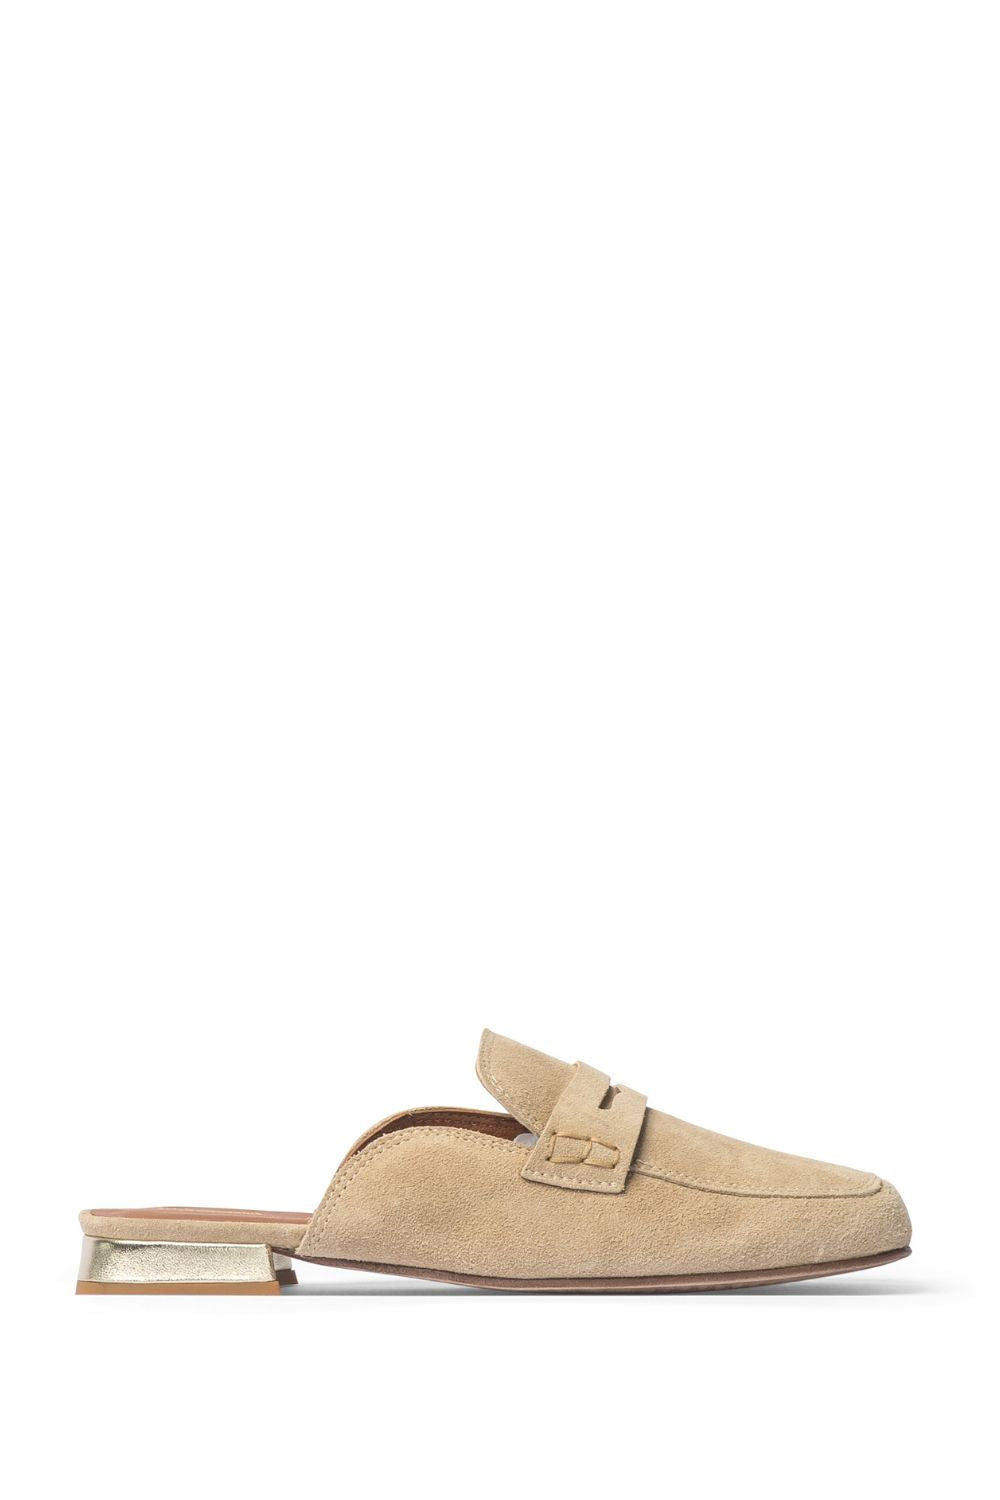 unlock loafer - fawn suede